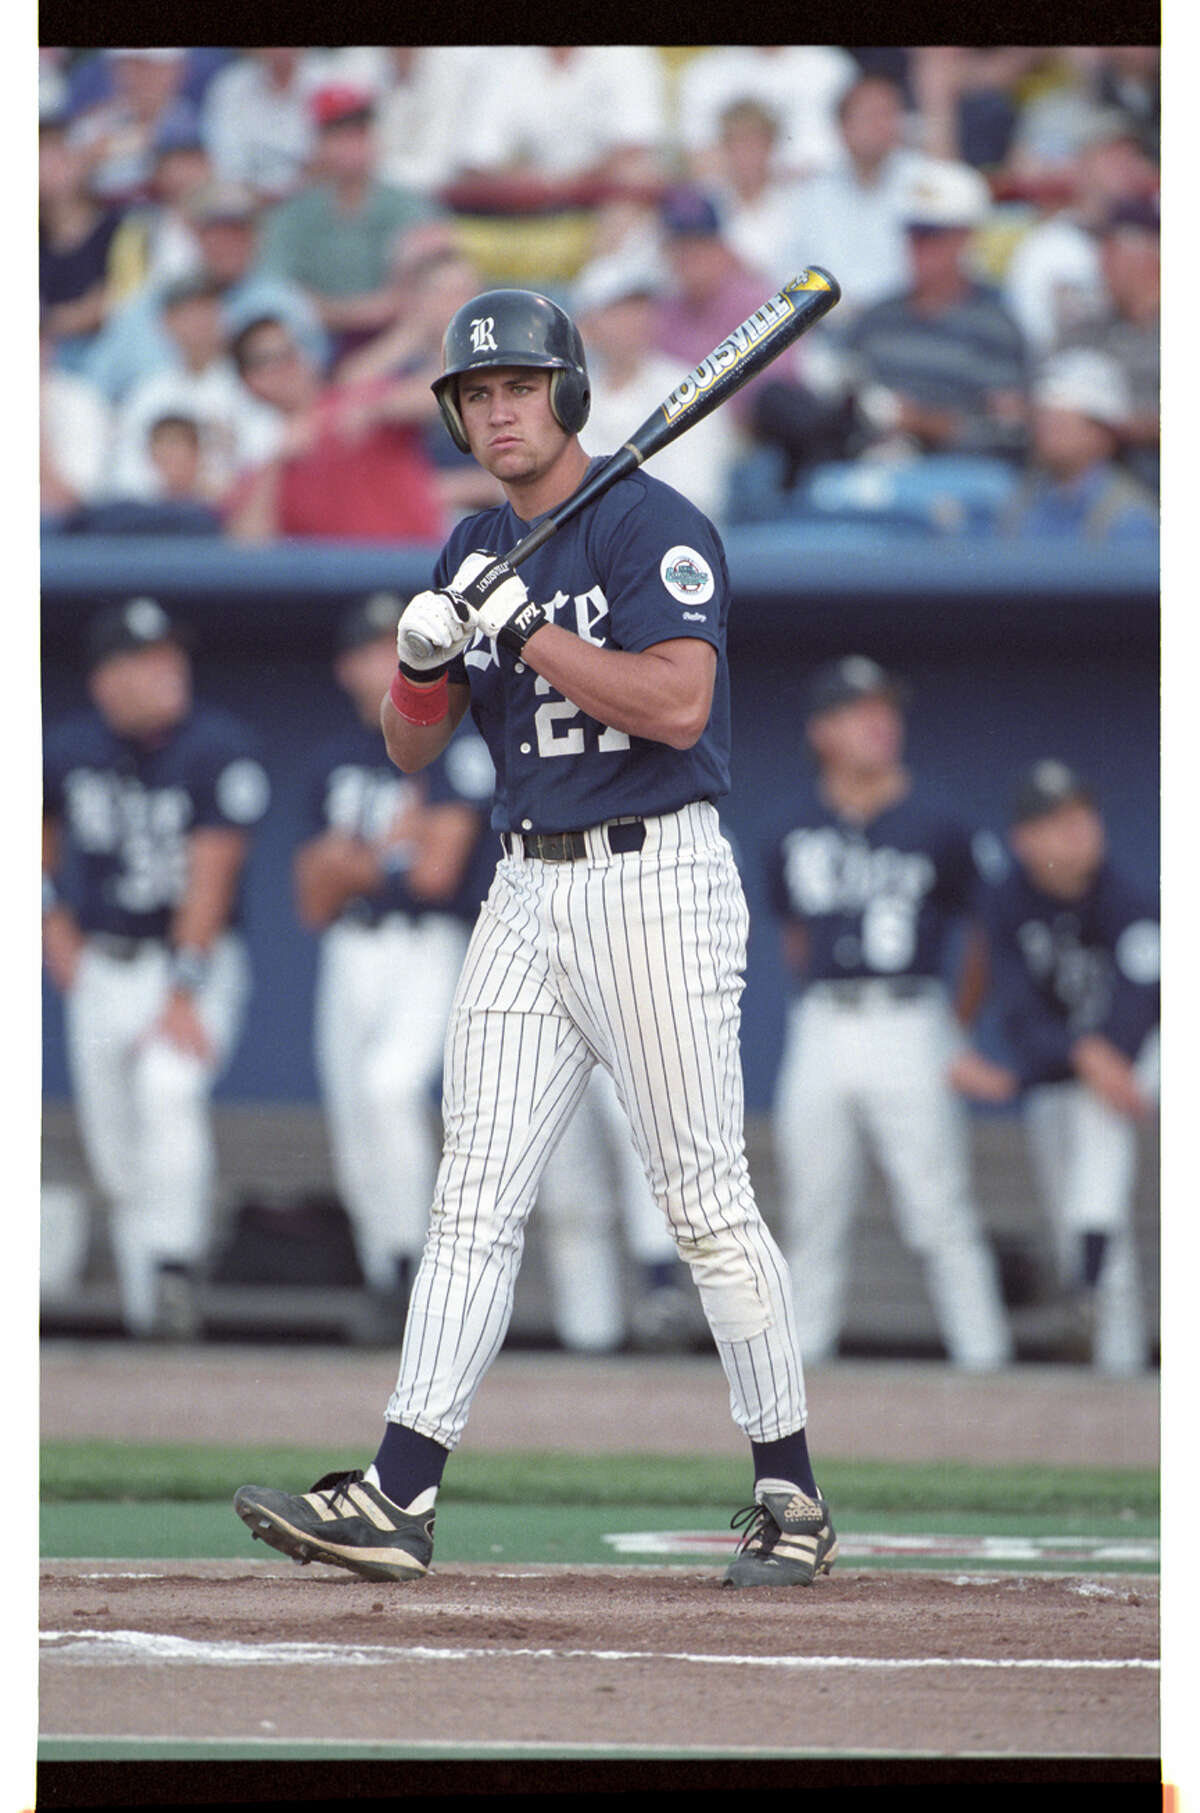 Six-time MLB All-Star and former Astros first baseman Lance Berkman was the 1997 National College Player of the Year as a member of the Rice baseball team. He finished his career at Rice with 67 home runs, 272 RBI and a .386 batting average.